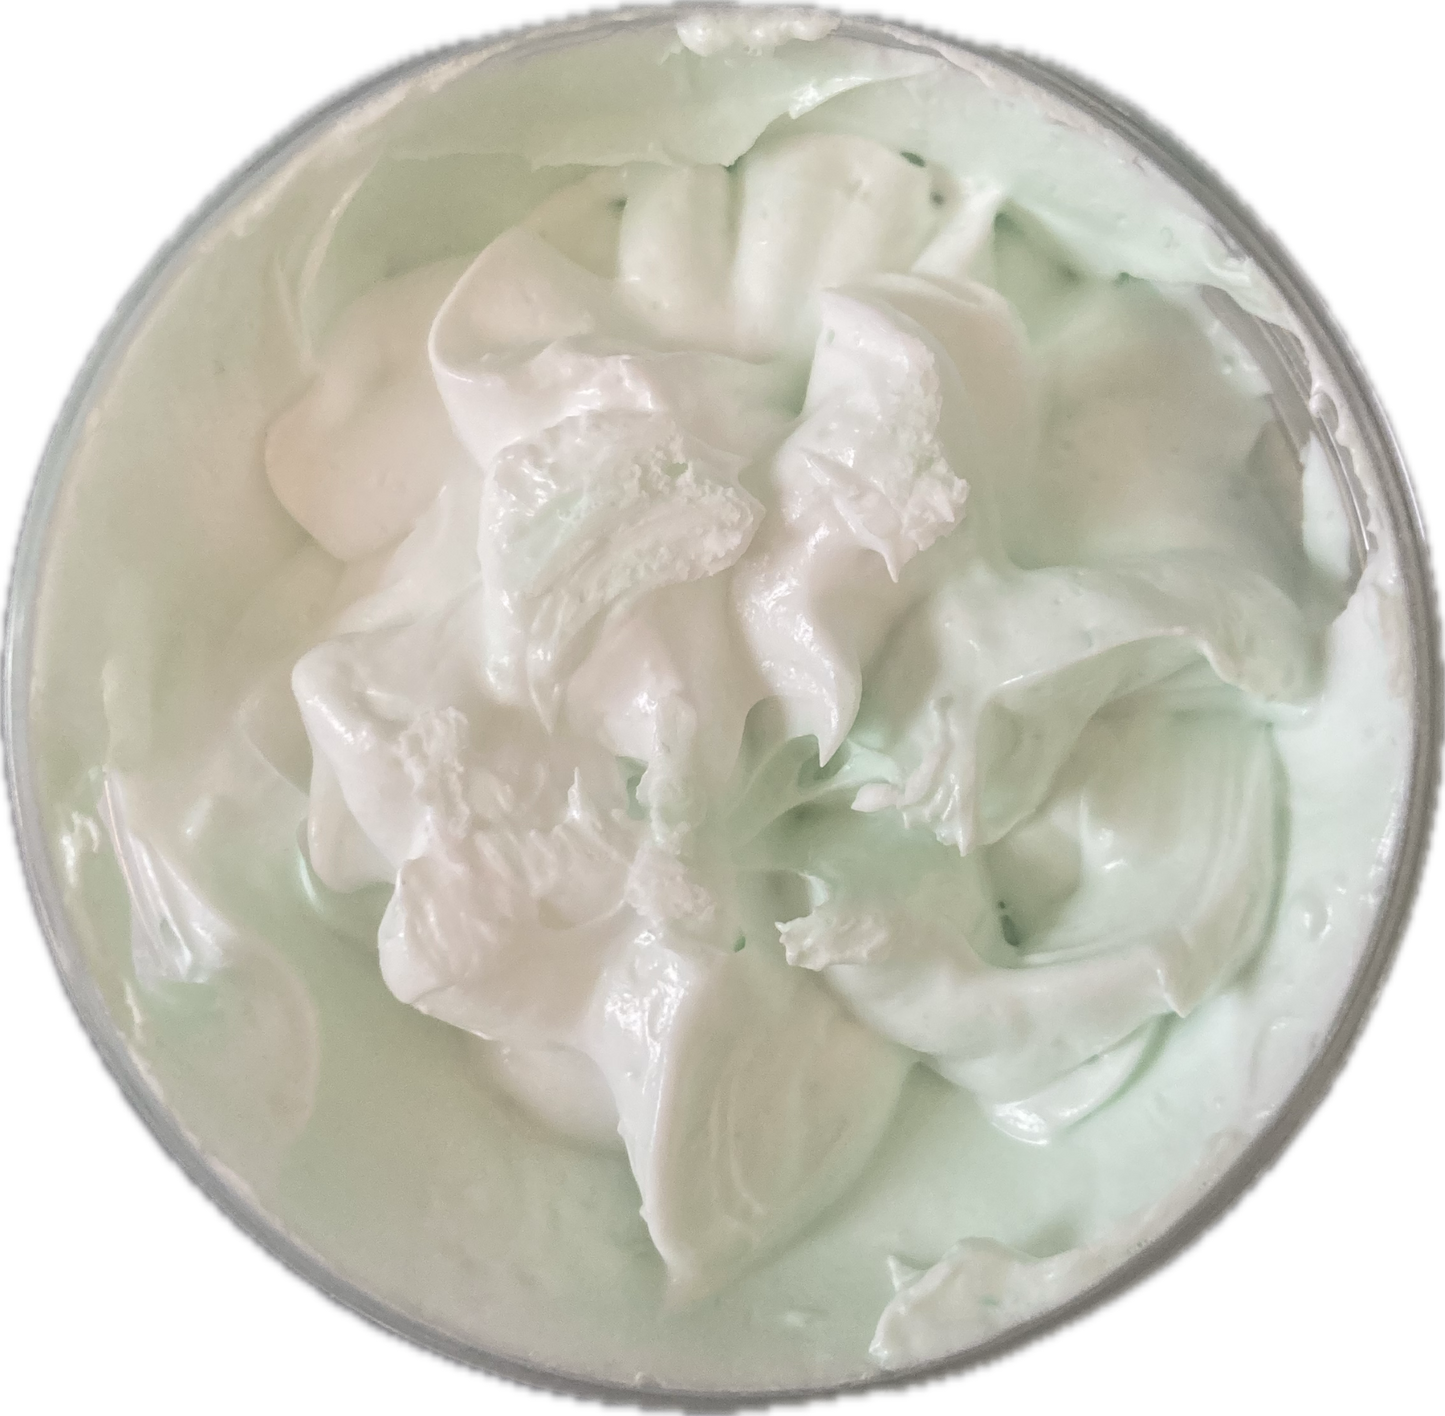 Lime, Basil & Mandarin Handcrafted Whipped Soap